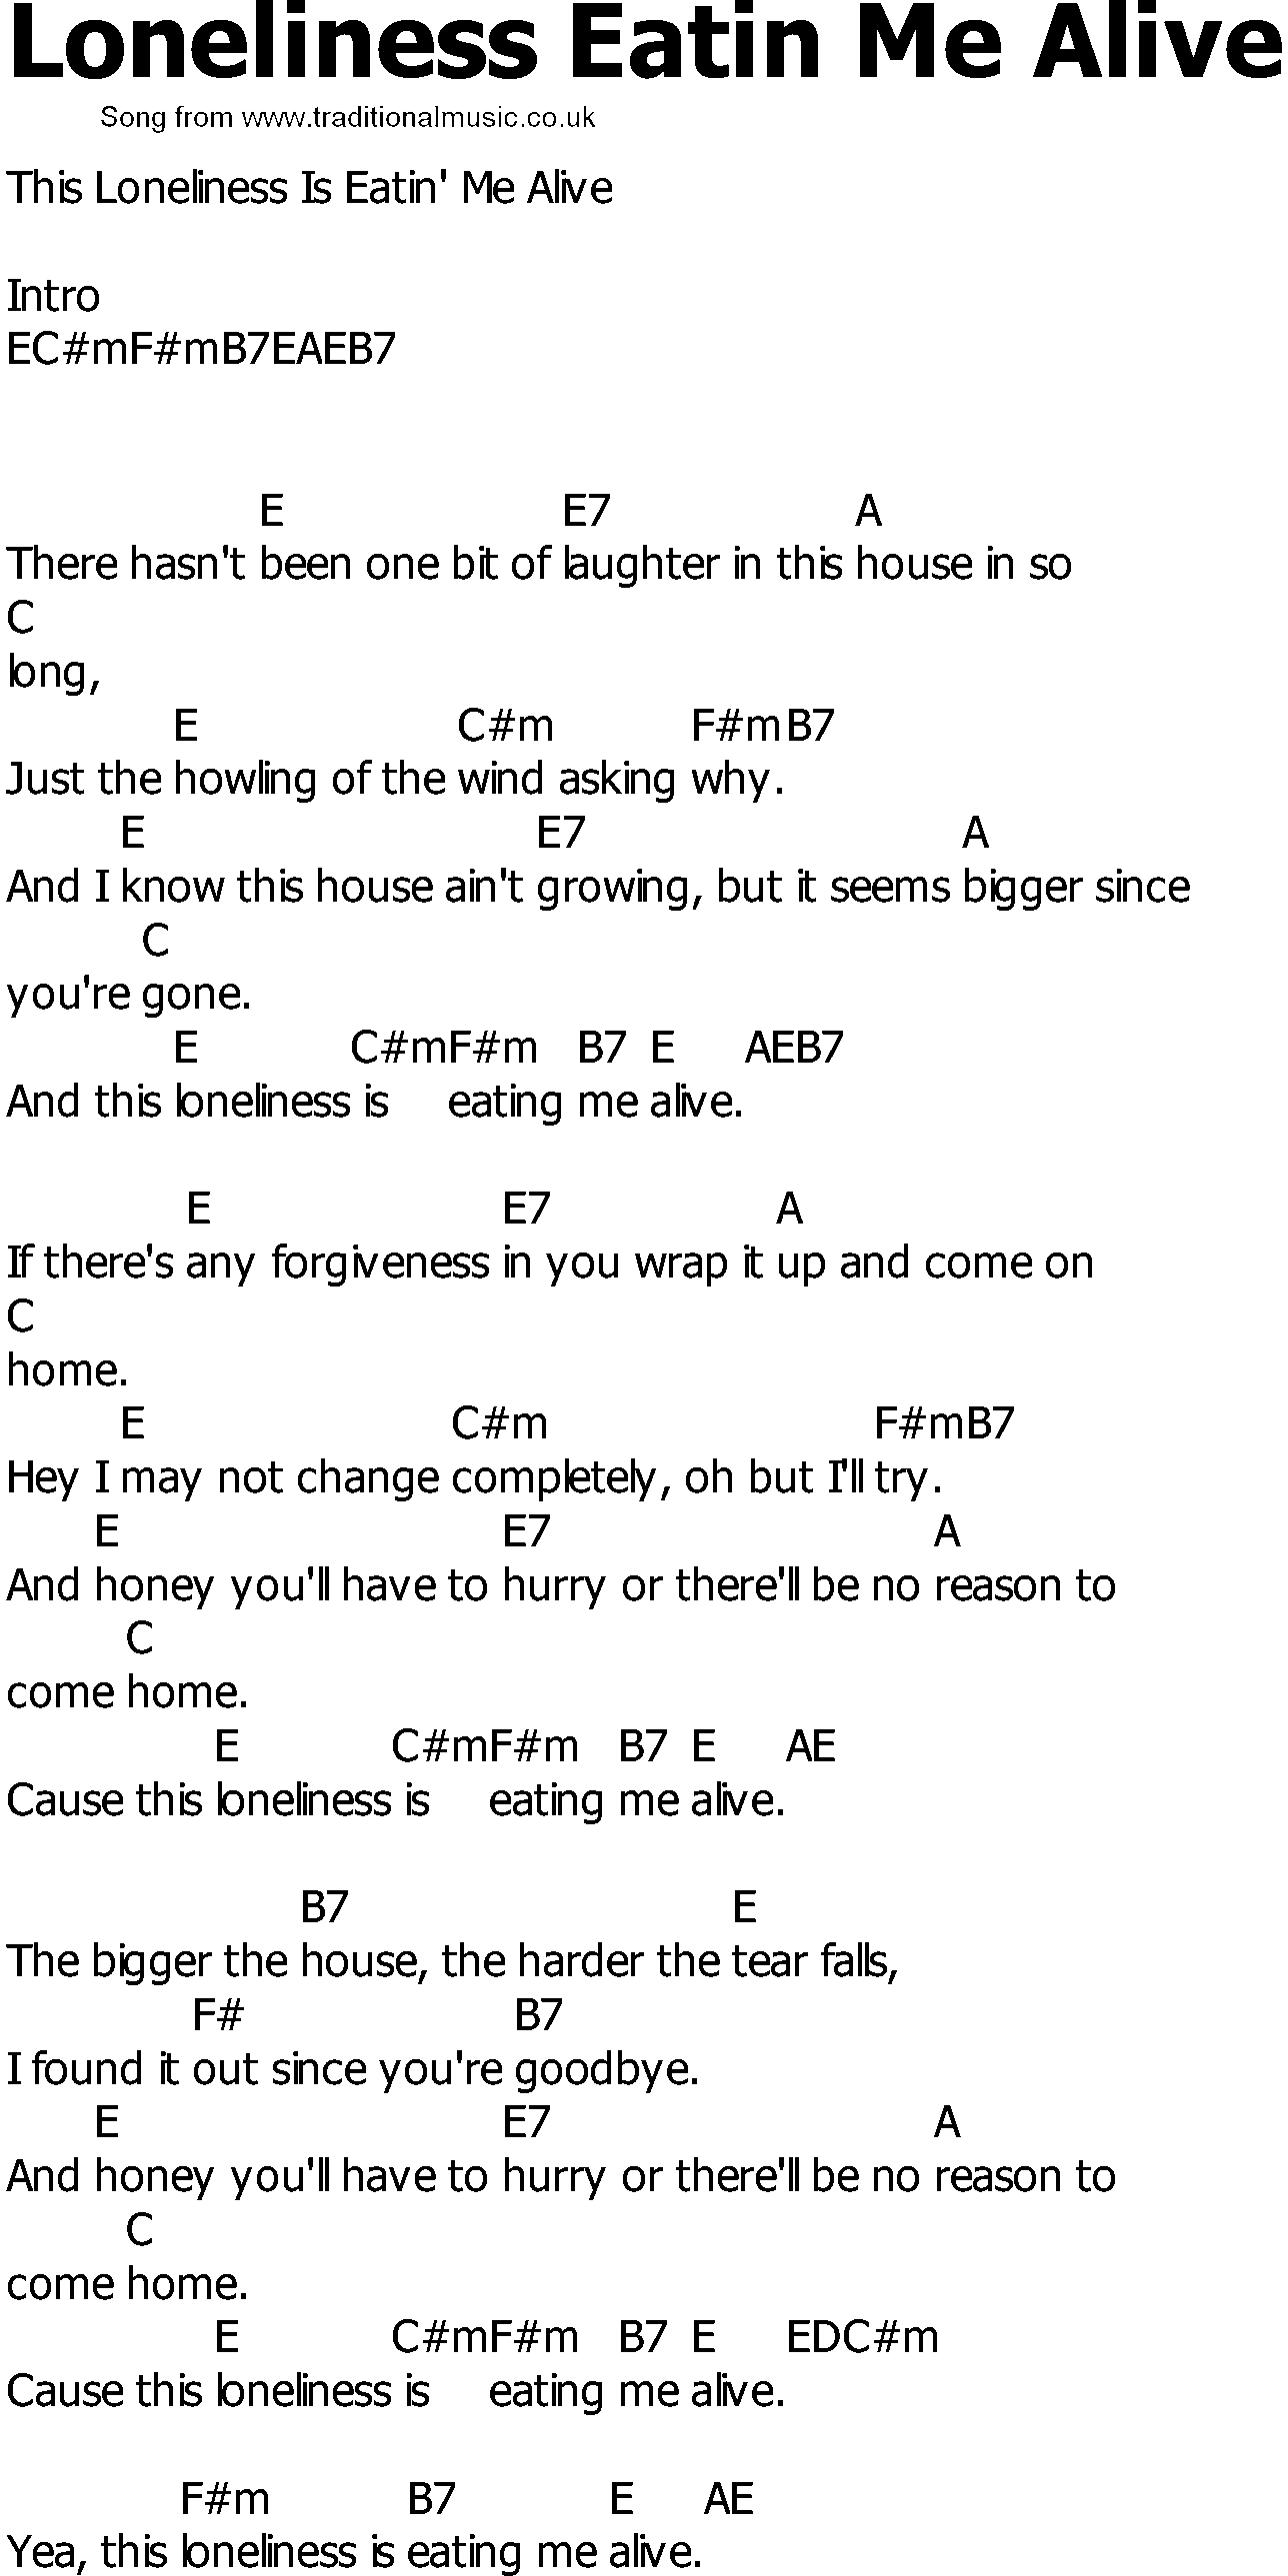 Old Country song lyrics with chords - Loneliness Eatin Me Alive